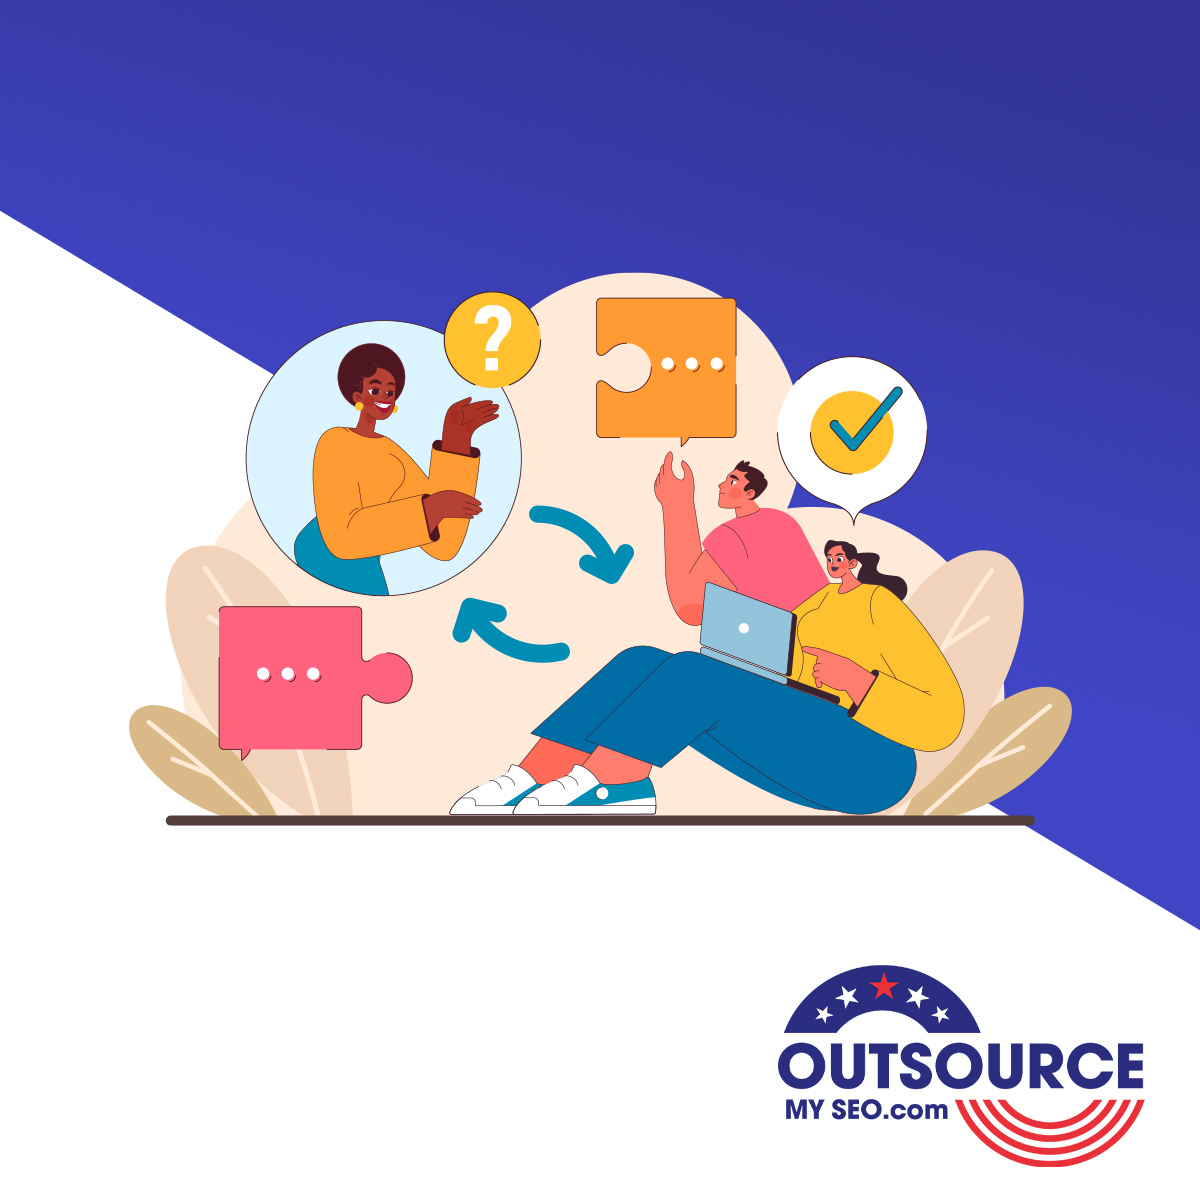 Boost client loyalty and your bottom line with SEO outsourcing! Provide top-notch services to increase online visibility and traffic. bit.ly/3K4SVLc #SEOOutsourcing #ClientRelationships #MarketingGrowth #OnlineVisibility #WebsiteTraffic #LoyaltyBoost ❤️